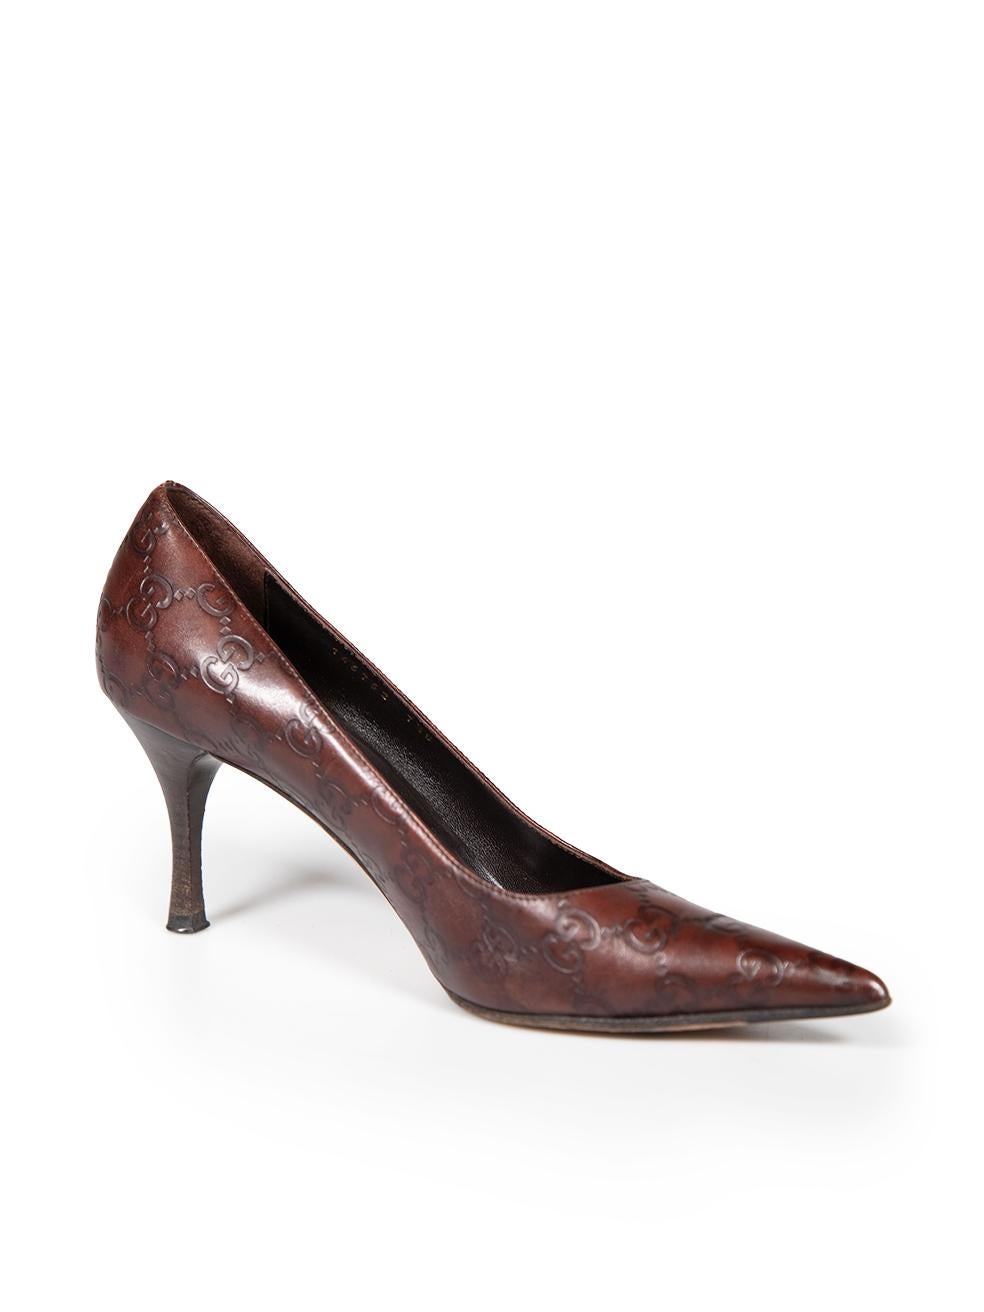 CONDITION is Very good. Minimal wear to pumps is evident. Minimal abrasion to the front tip and back of both shoes. Scratches on both heels of the shoes on this used Gucci designer resale item.
 
 
 
 Details
 
 
 Brown
 
 Leather
 
 Slip on pumps
